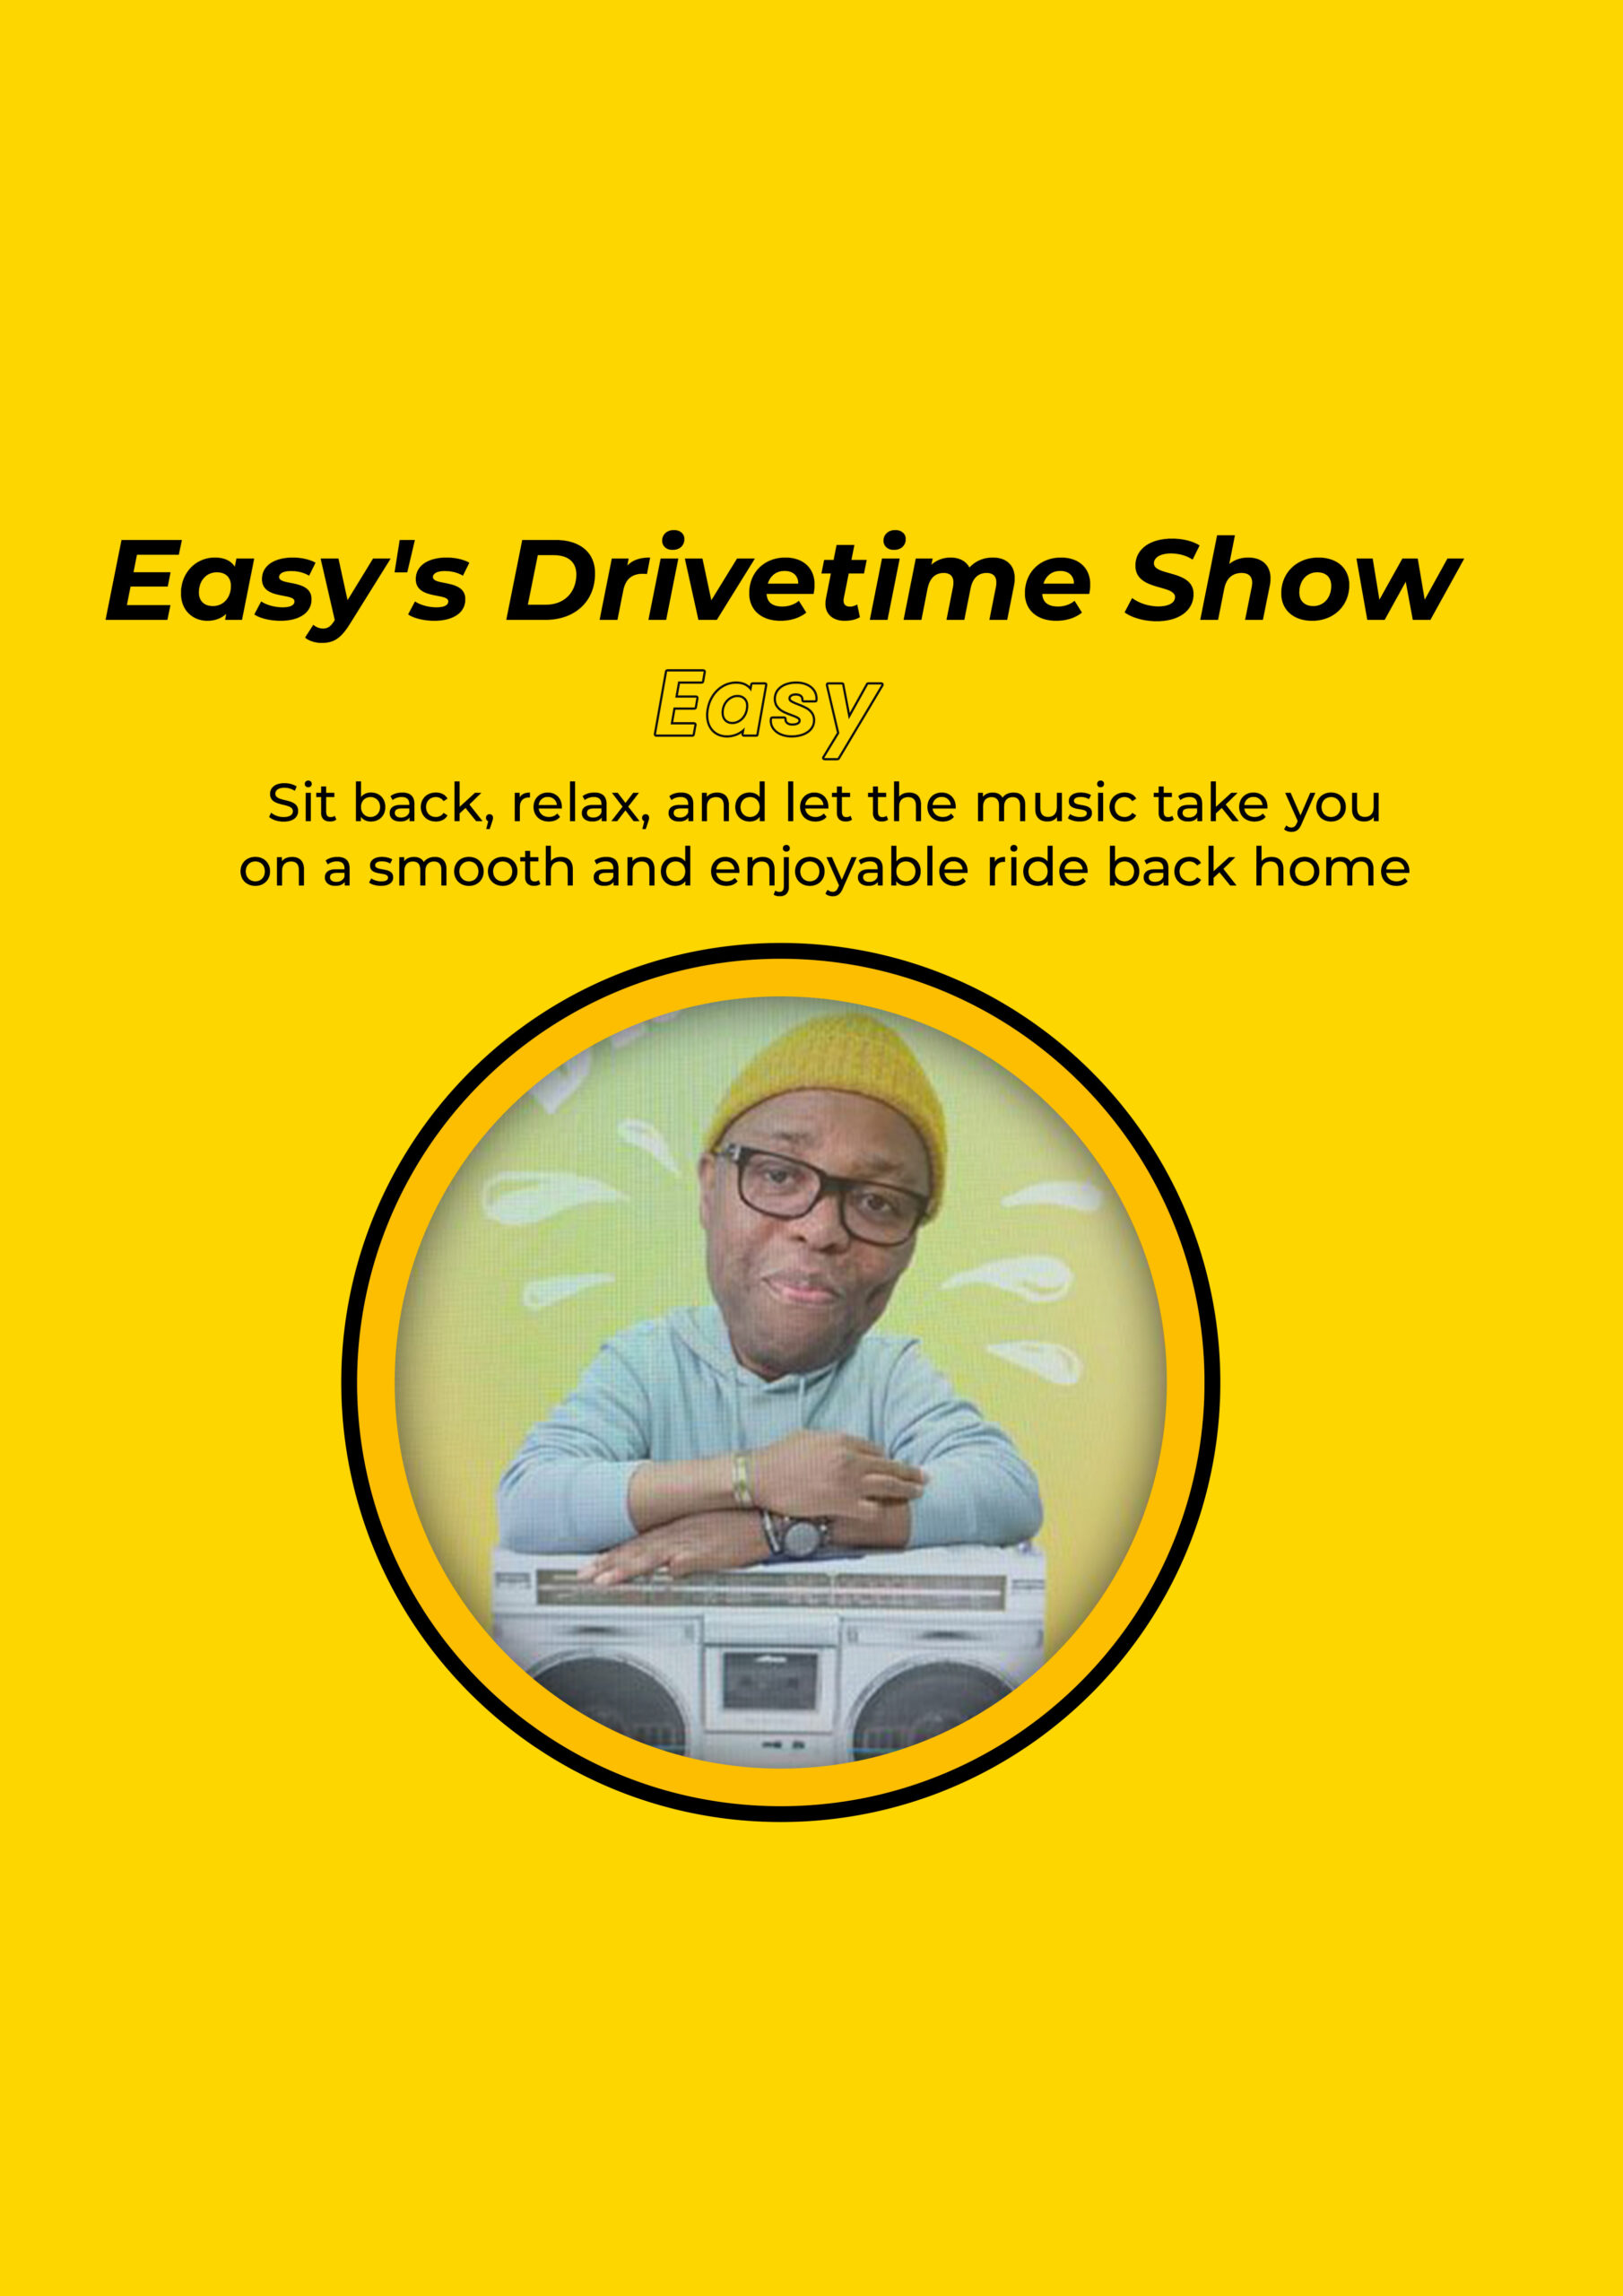 Easy's Drivetime Show